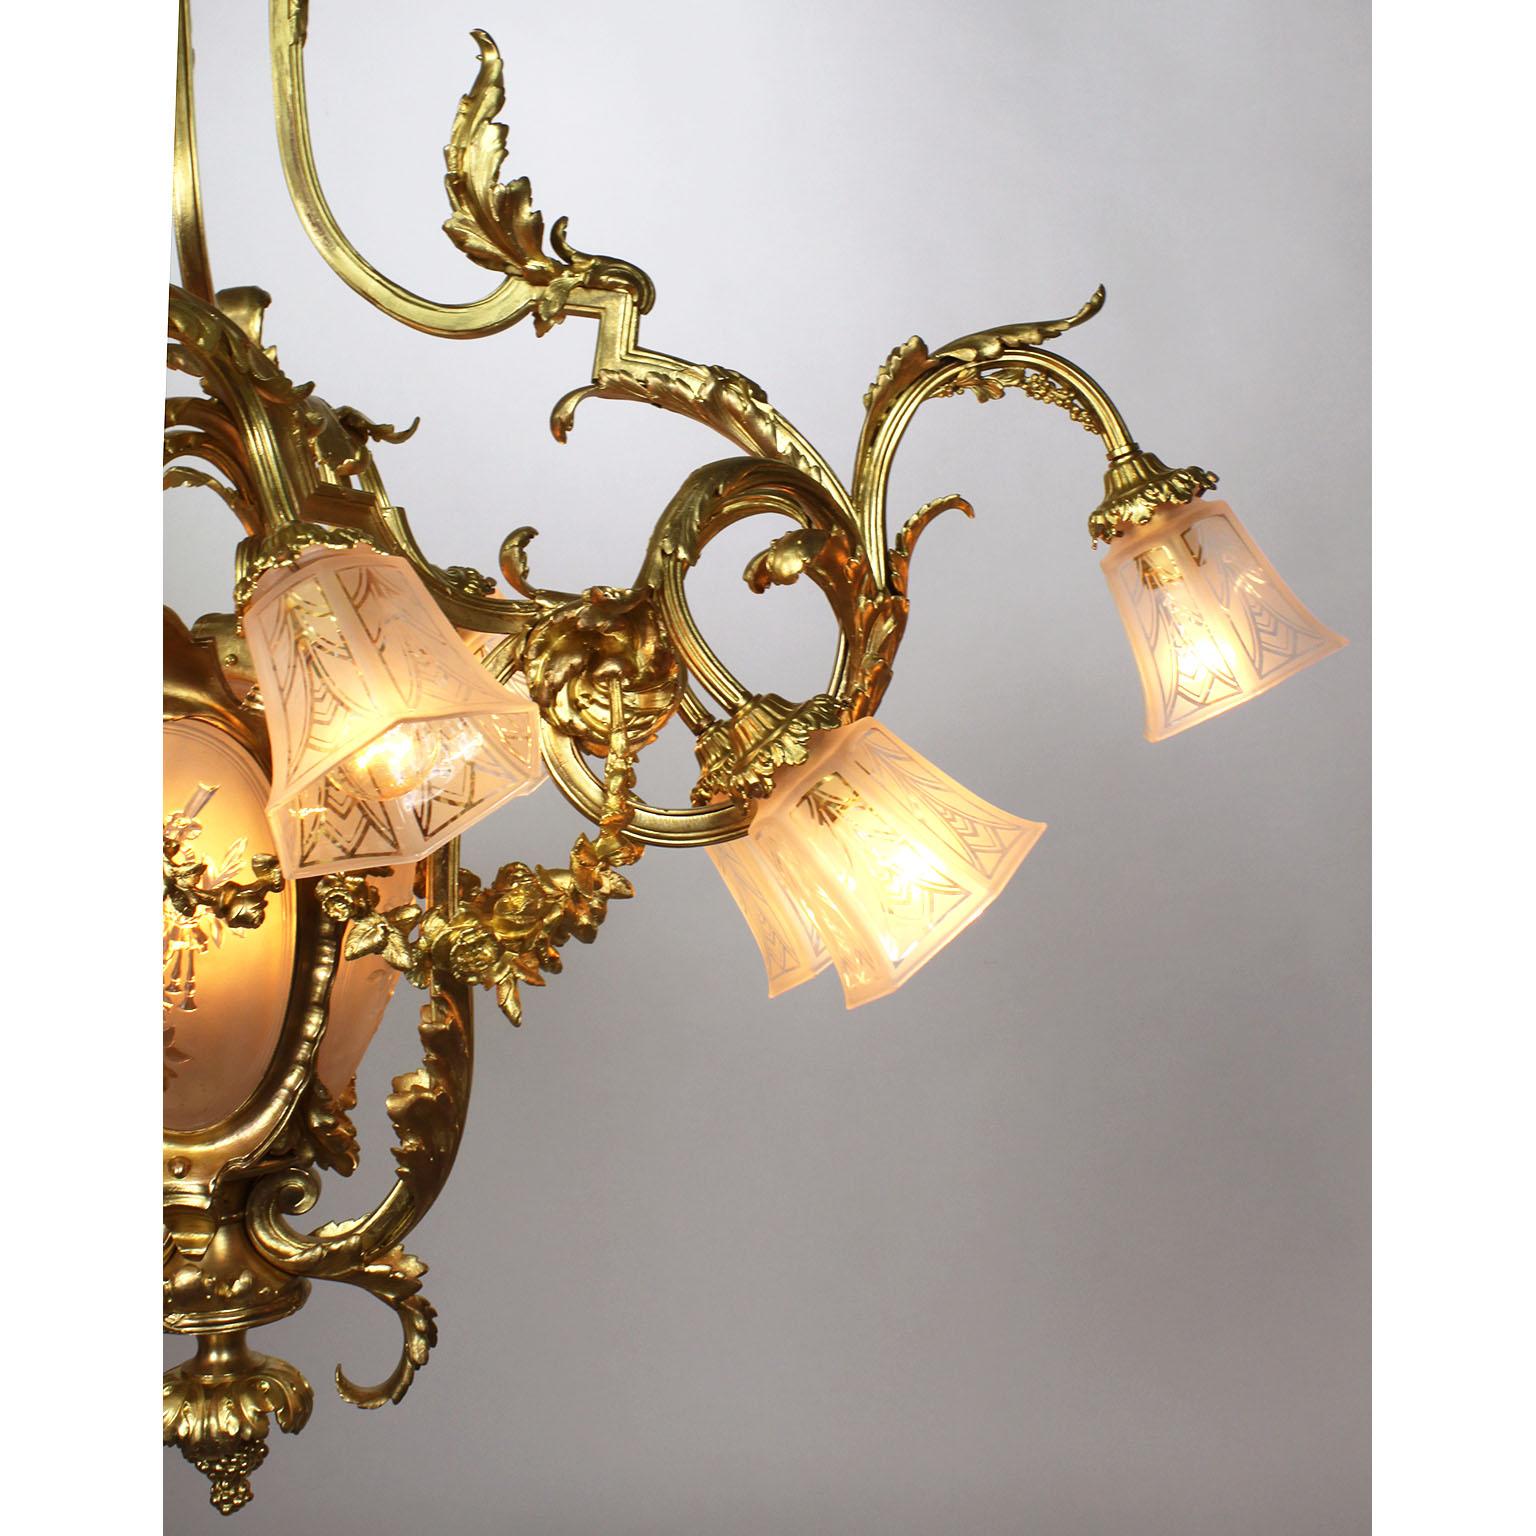 Early 20th Century French Belle Époque Gilt-Bronze & Molded Glass 15-Light Lyre Style Chandelier For Sale